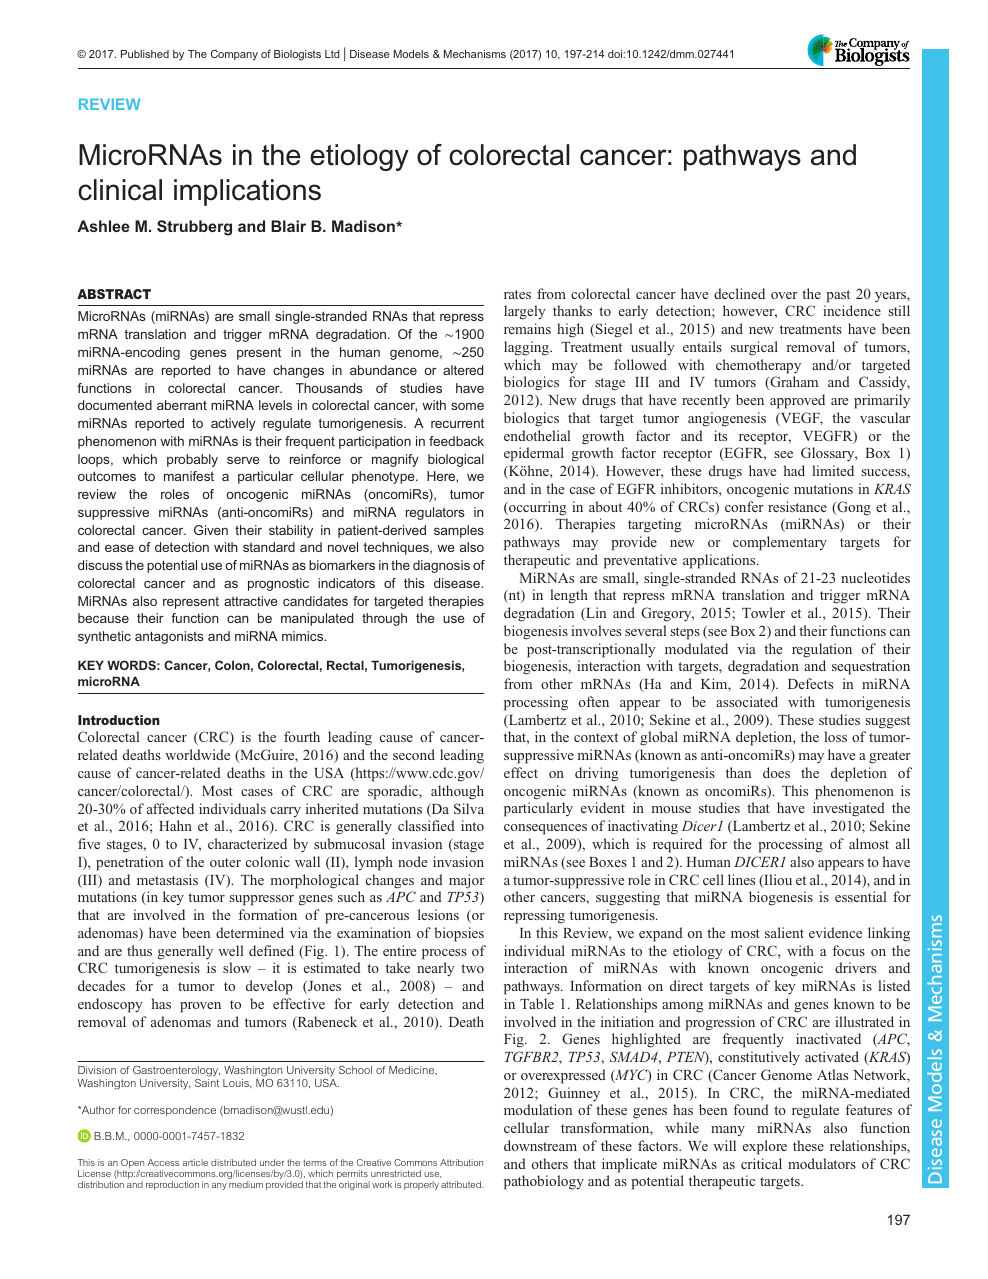 Micrornas In The Etiology Of Colorectal Cancer Pathways And Clinical Implications Topic Of Research Paper In Biological Sciences Download Scholarly Article Pdf And Read For Free On Cyberleninka Open Science Hub